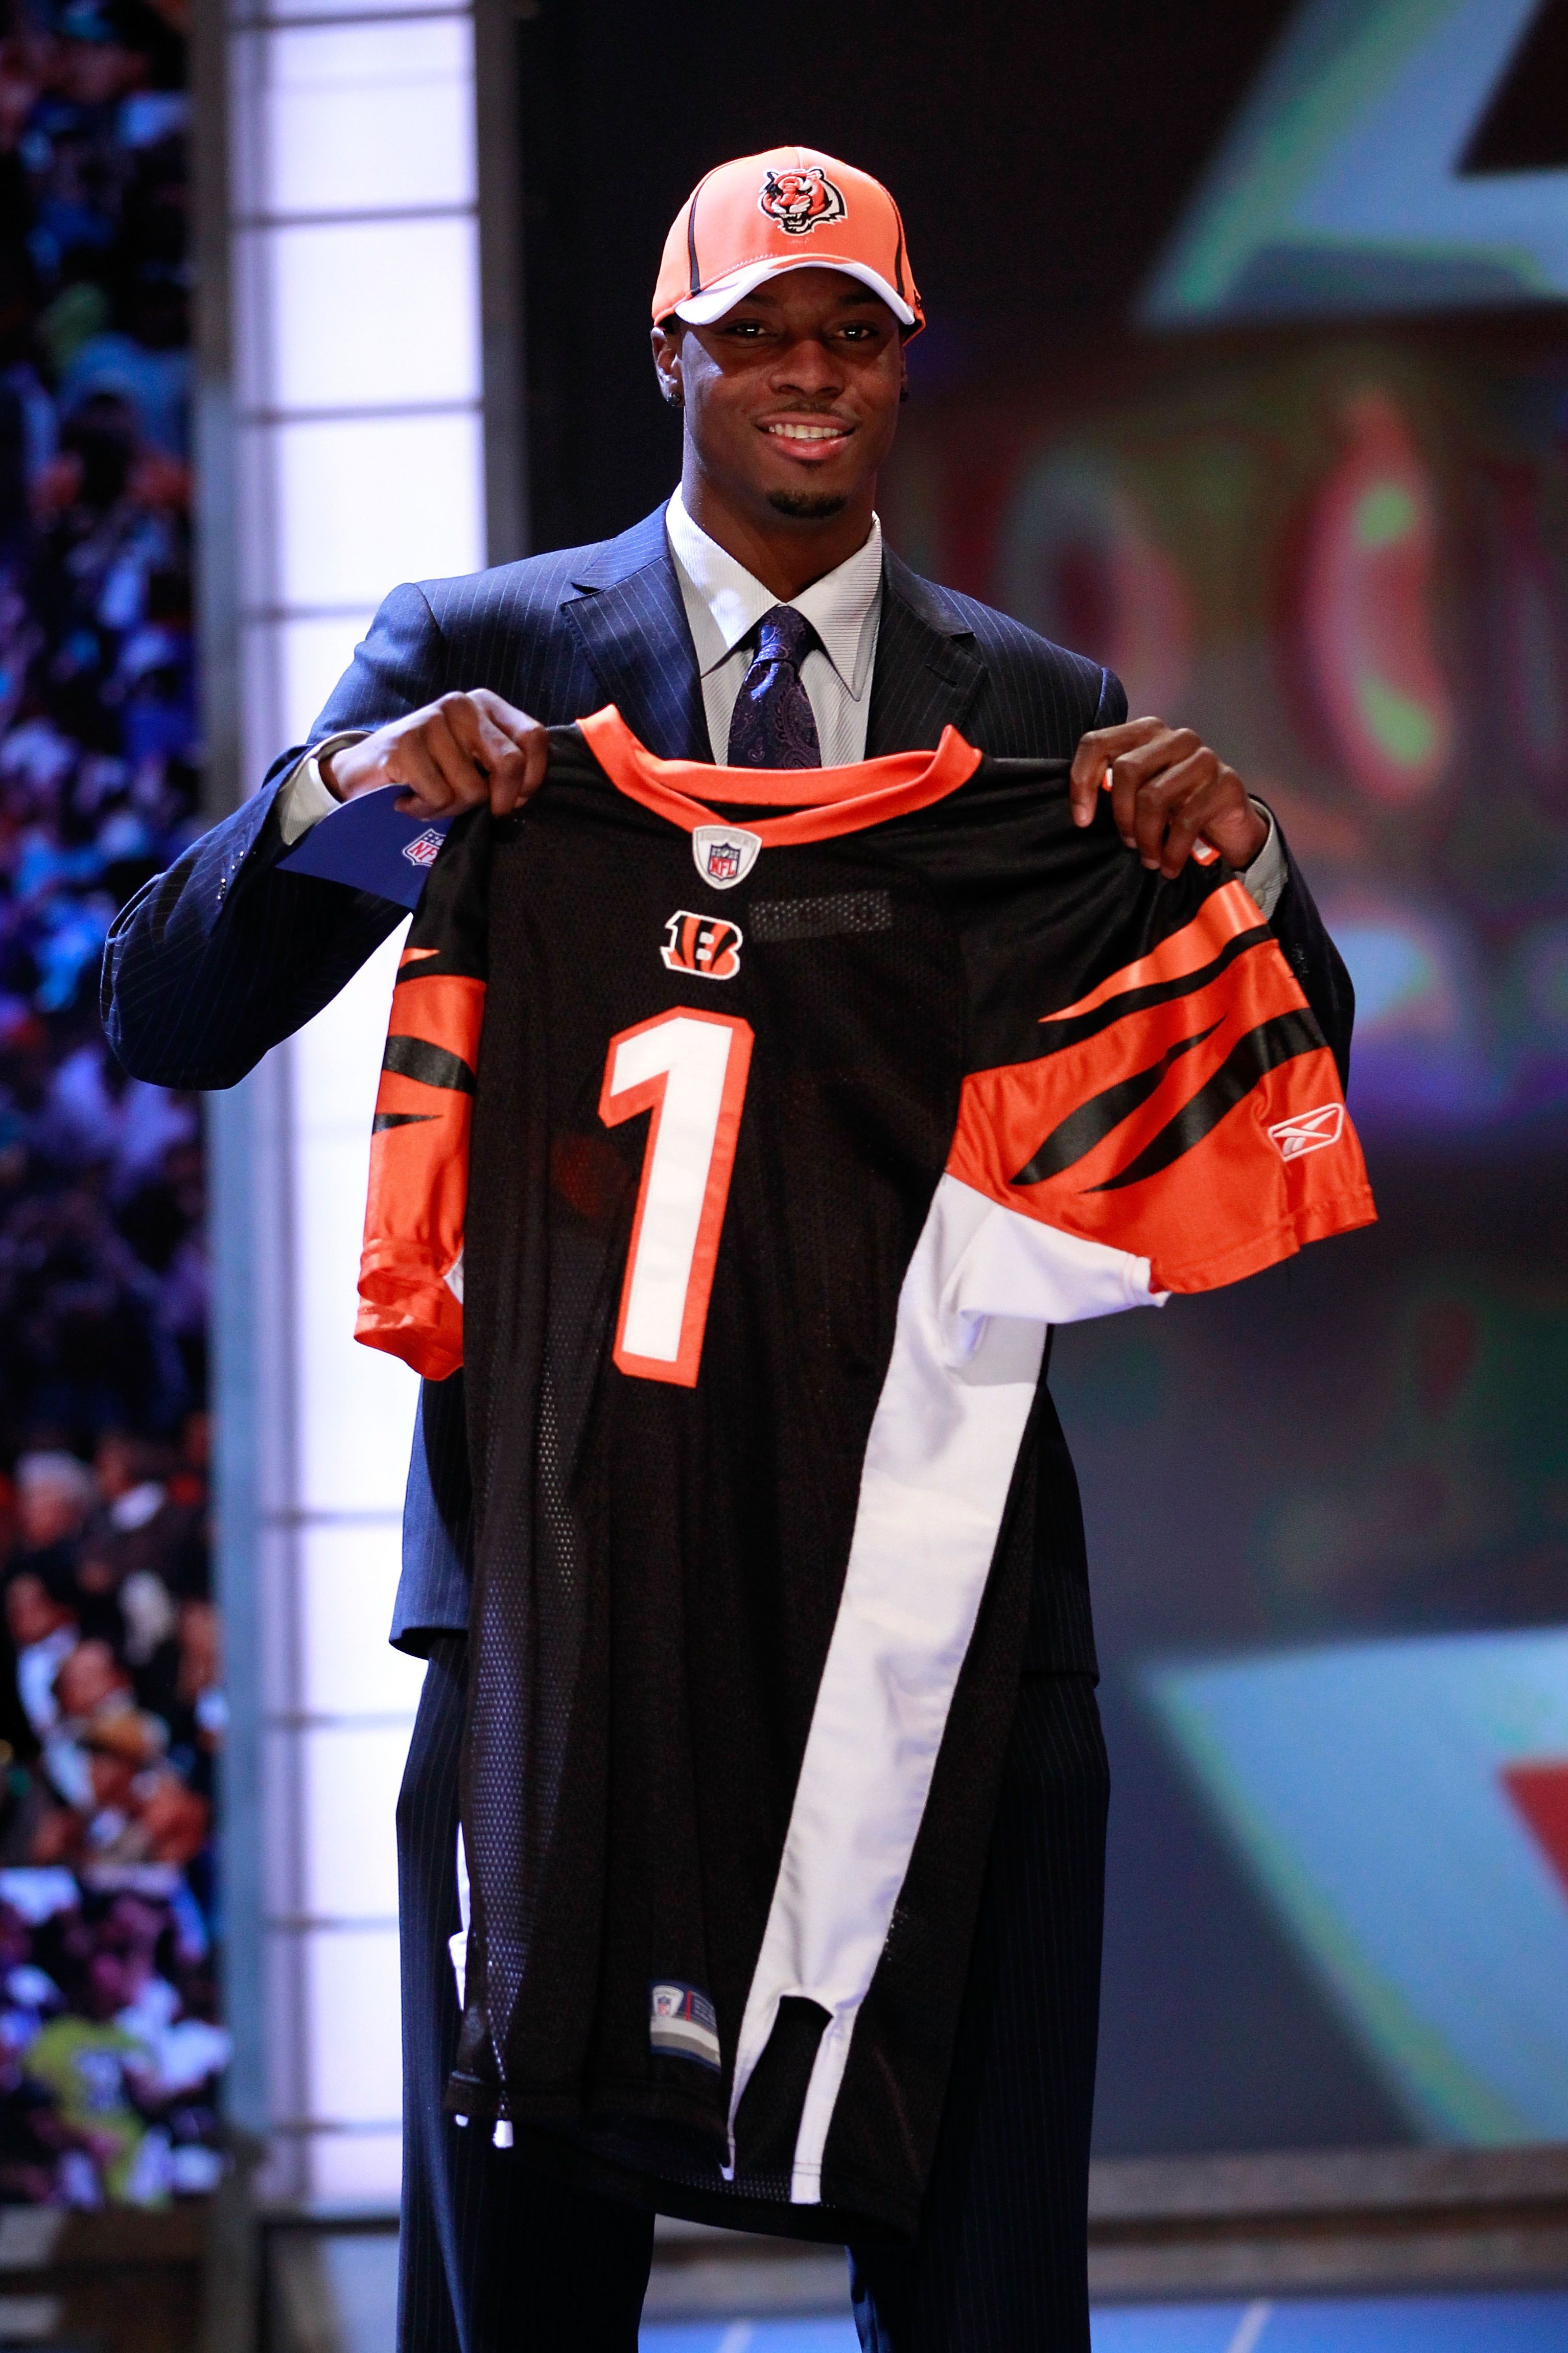 NEW YORK, NY - APRIL 28:  A.J. Green, #4 overall pick by the Cincinnati Bengals, holds up a jersey after he was drafted during the 2011 NFL Draft at Radio City Music Hall on April 28, 2011 in New York City.  (Photo by Chris Trotman/Getty Images)